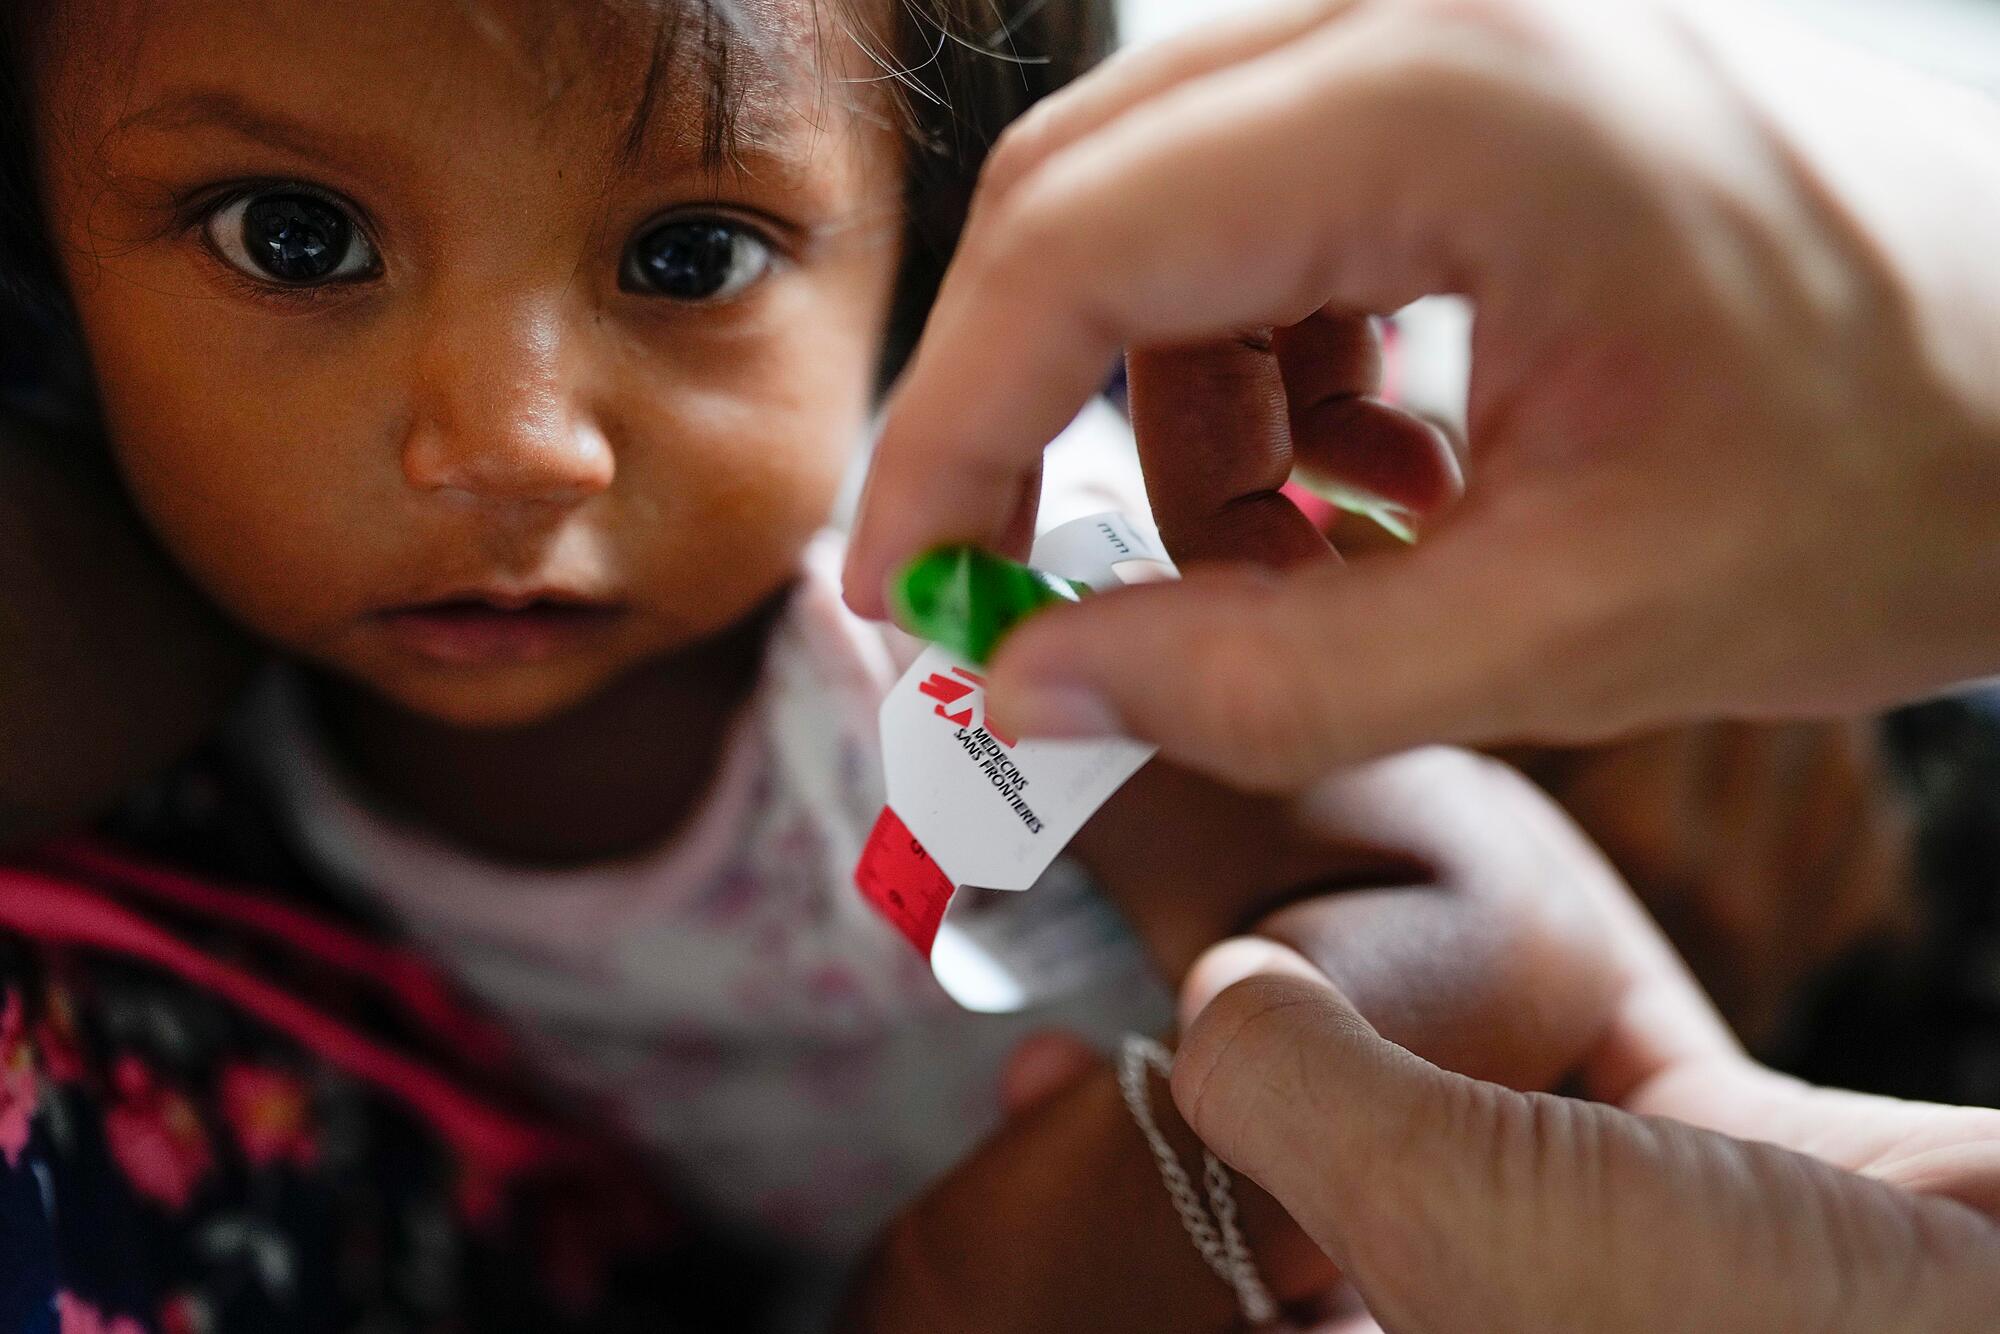 An indigenous child receives medical care from MSF teams in Venezuela.